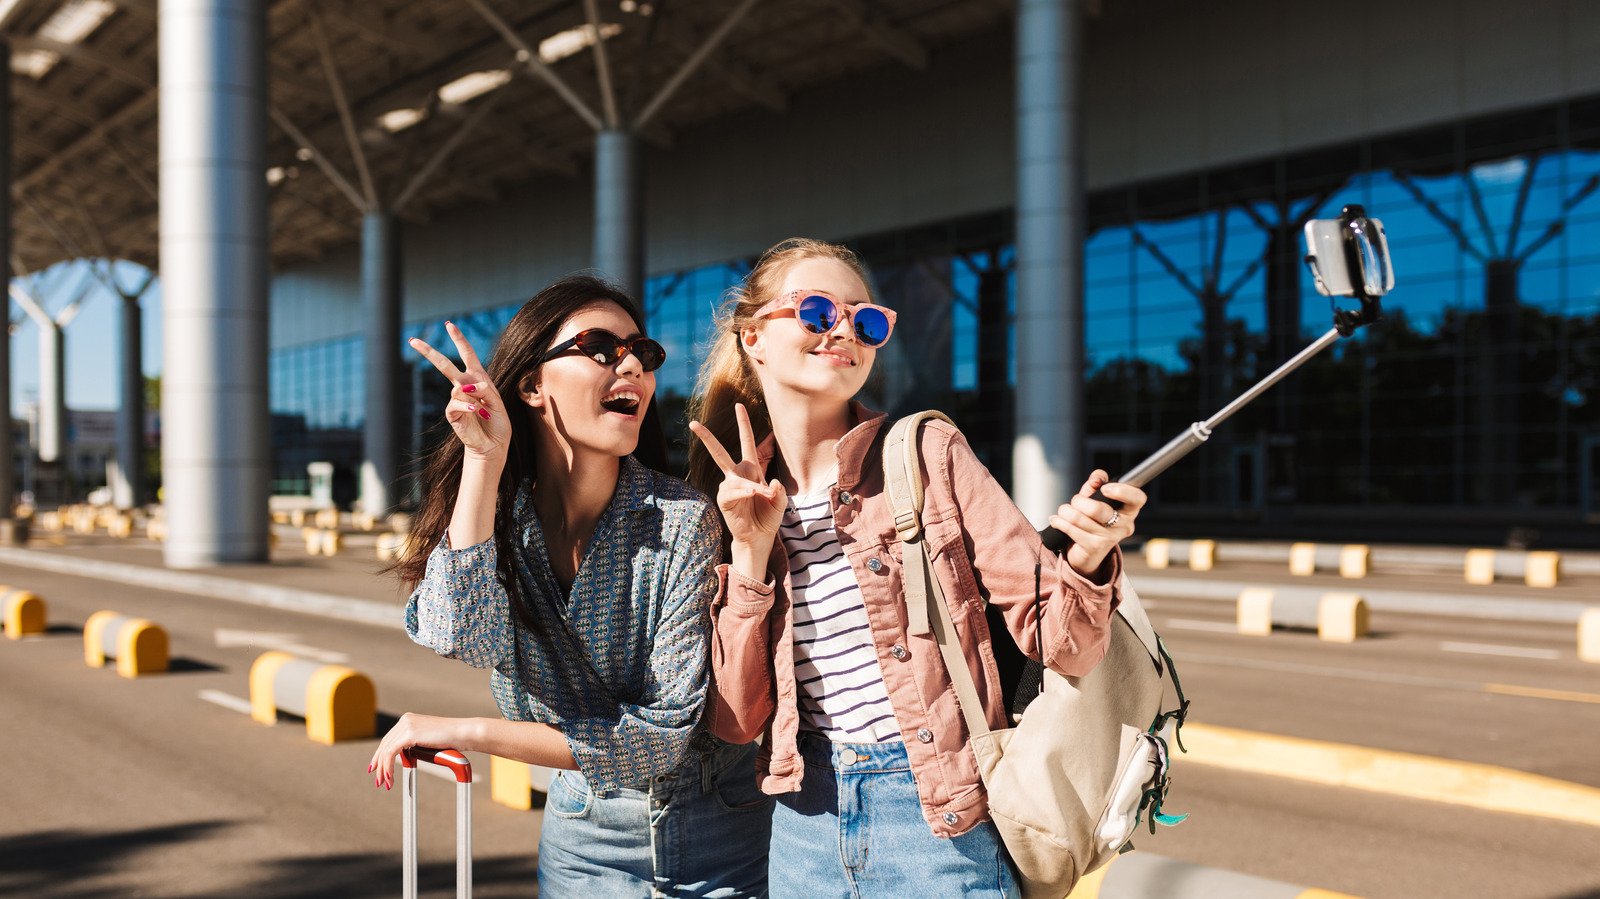 You Should Start Wearing Sunglasses At The Airport. Here's Why. - Health Digest